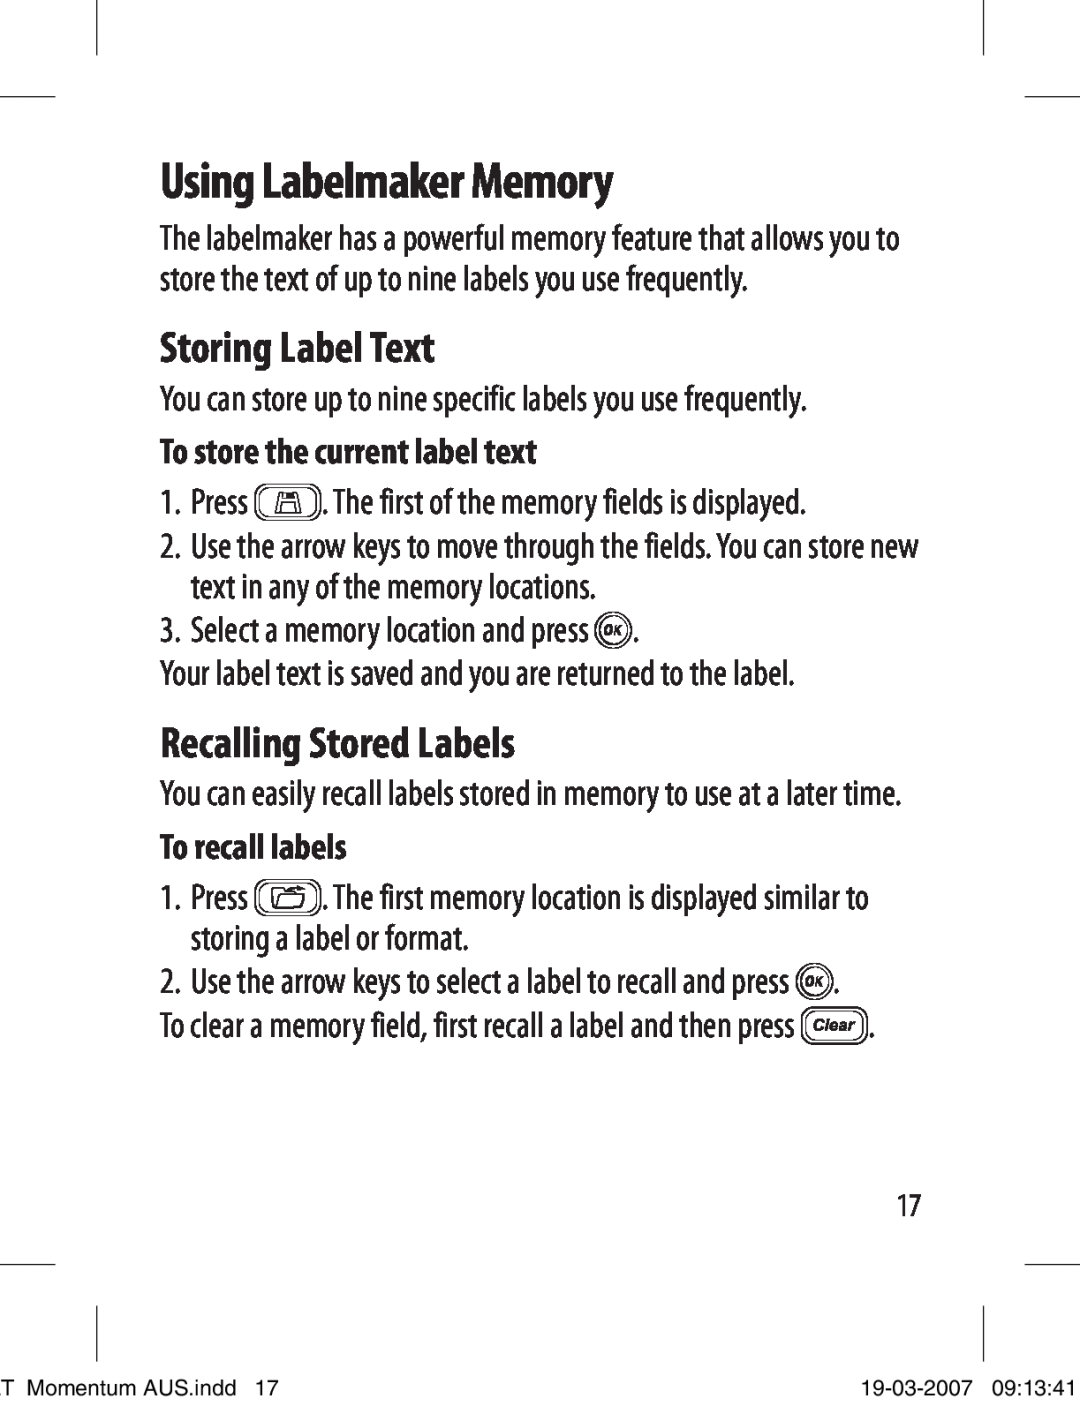 Dymo LT-100T Using Labelmaker Memory, Storing Label Text, Recalling Stored Labels, Select a memory location and press ã 